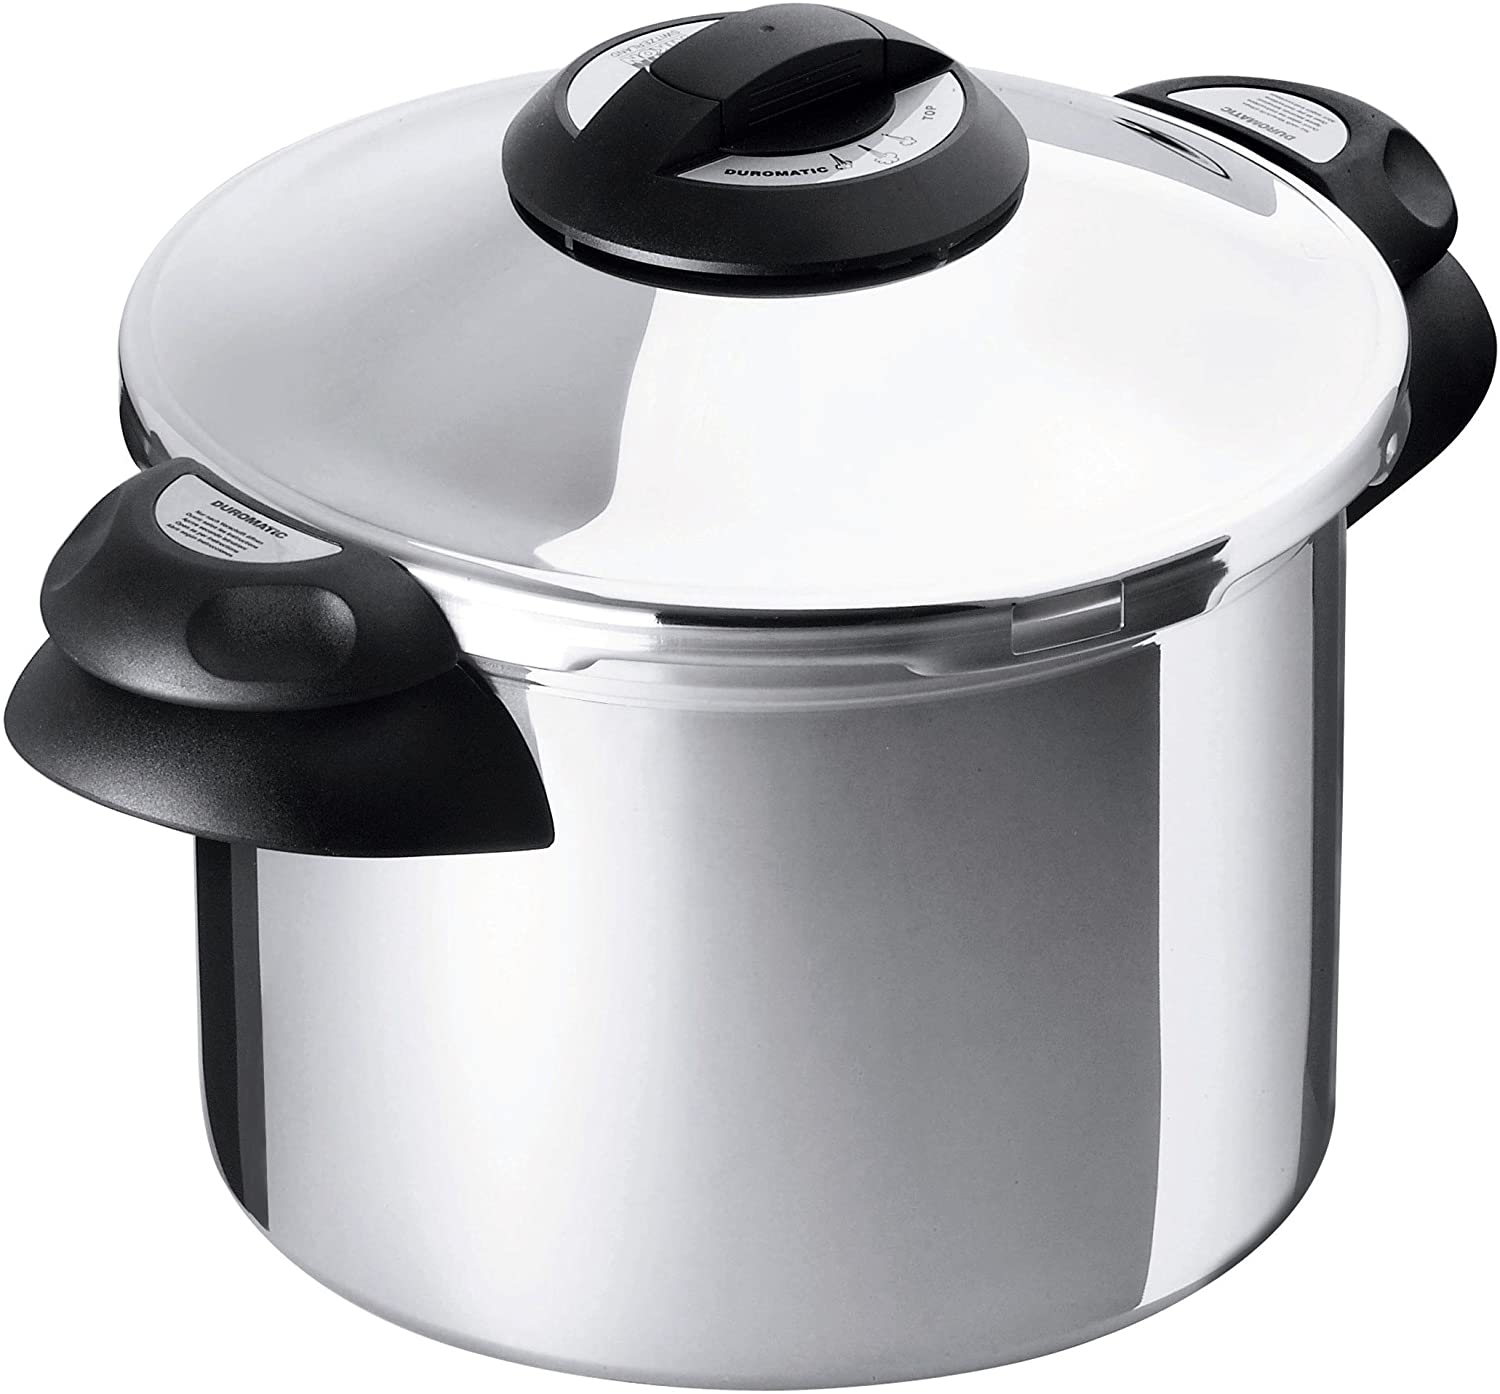 Kuhn Rikon Duromatic Top Pressure Cooker With Side Grips (24 cm), 6.0 Litre